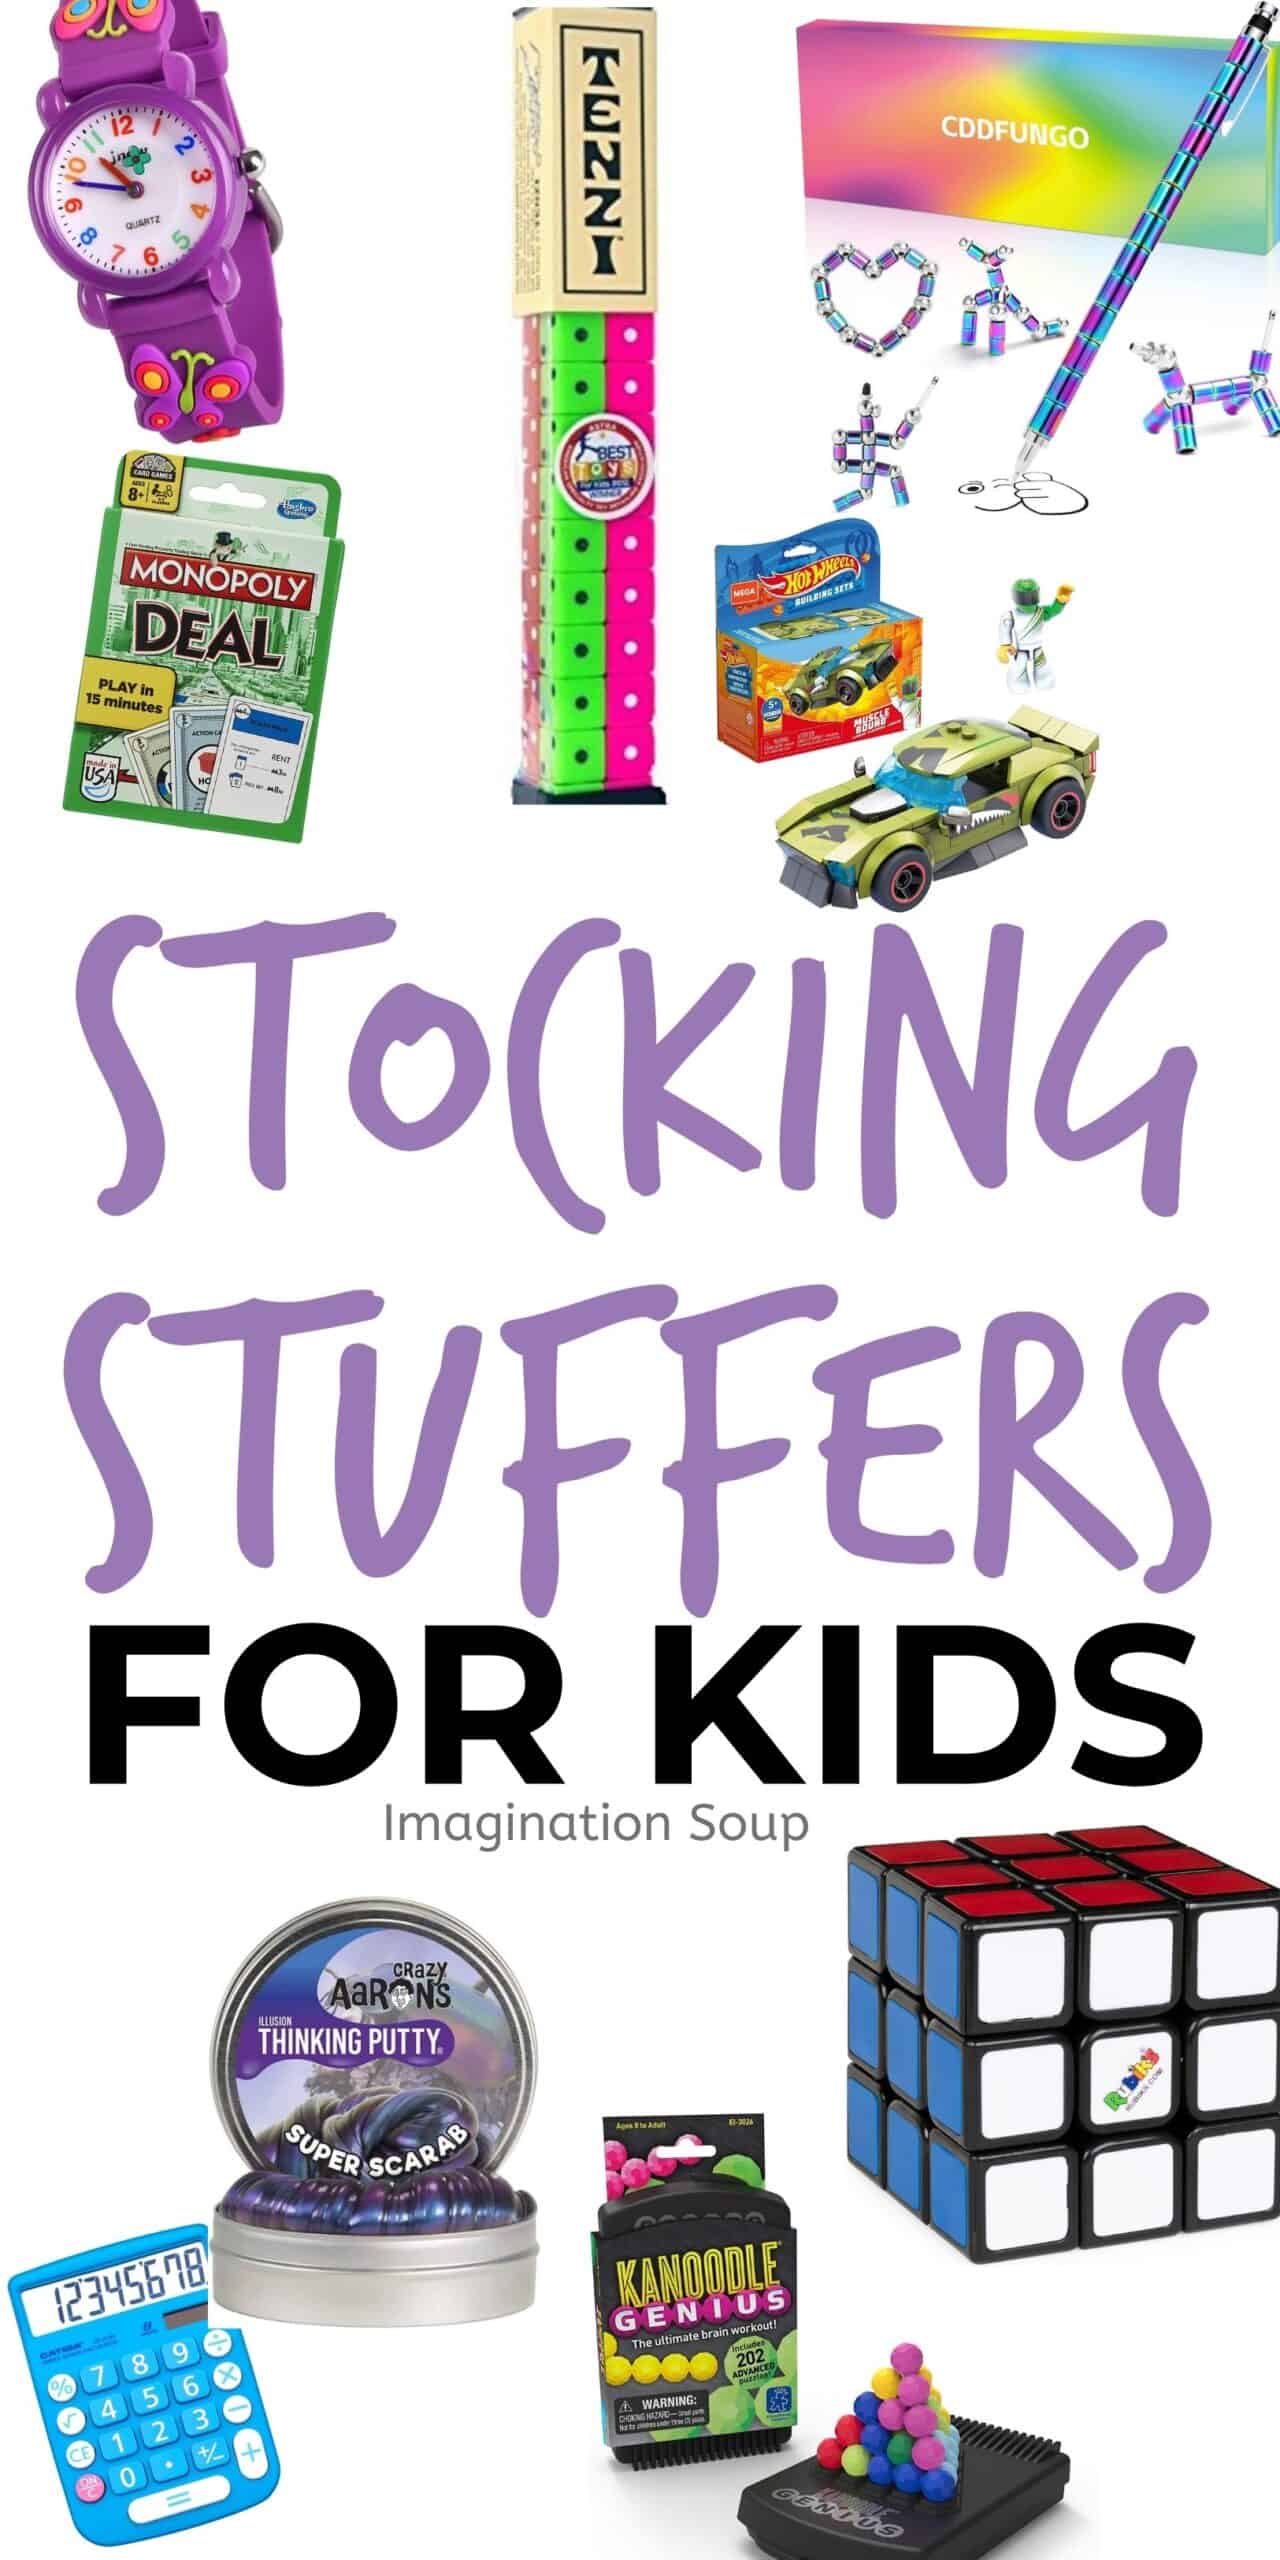 Stocking Stuffer Ideas for Kids (by AGE)